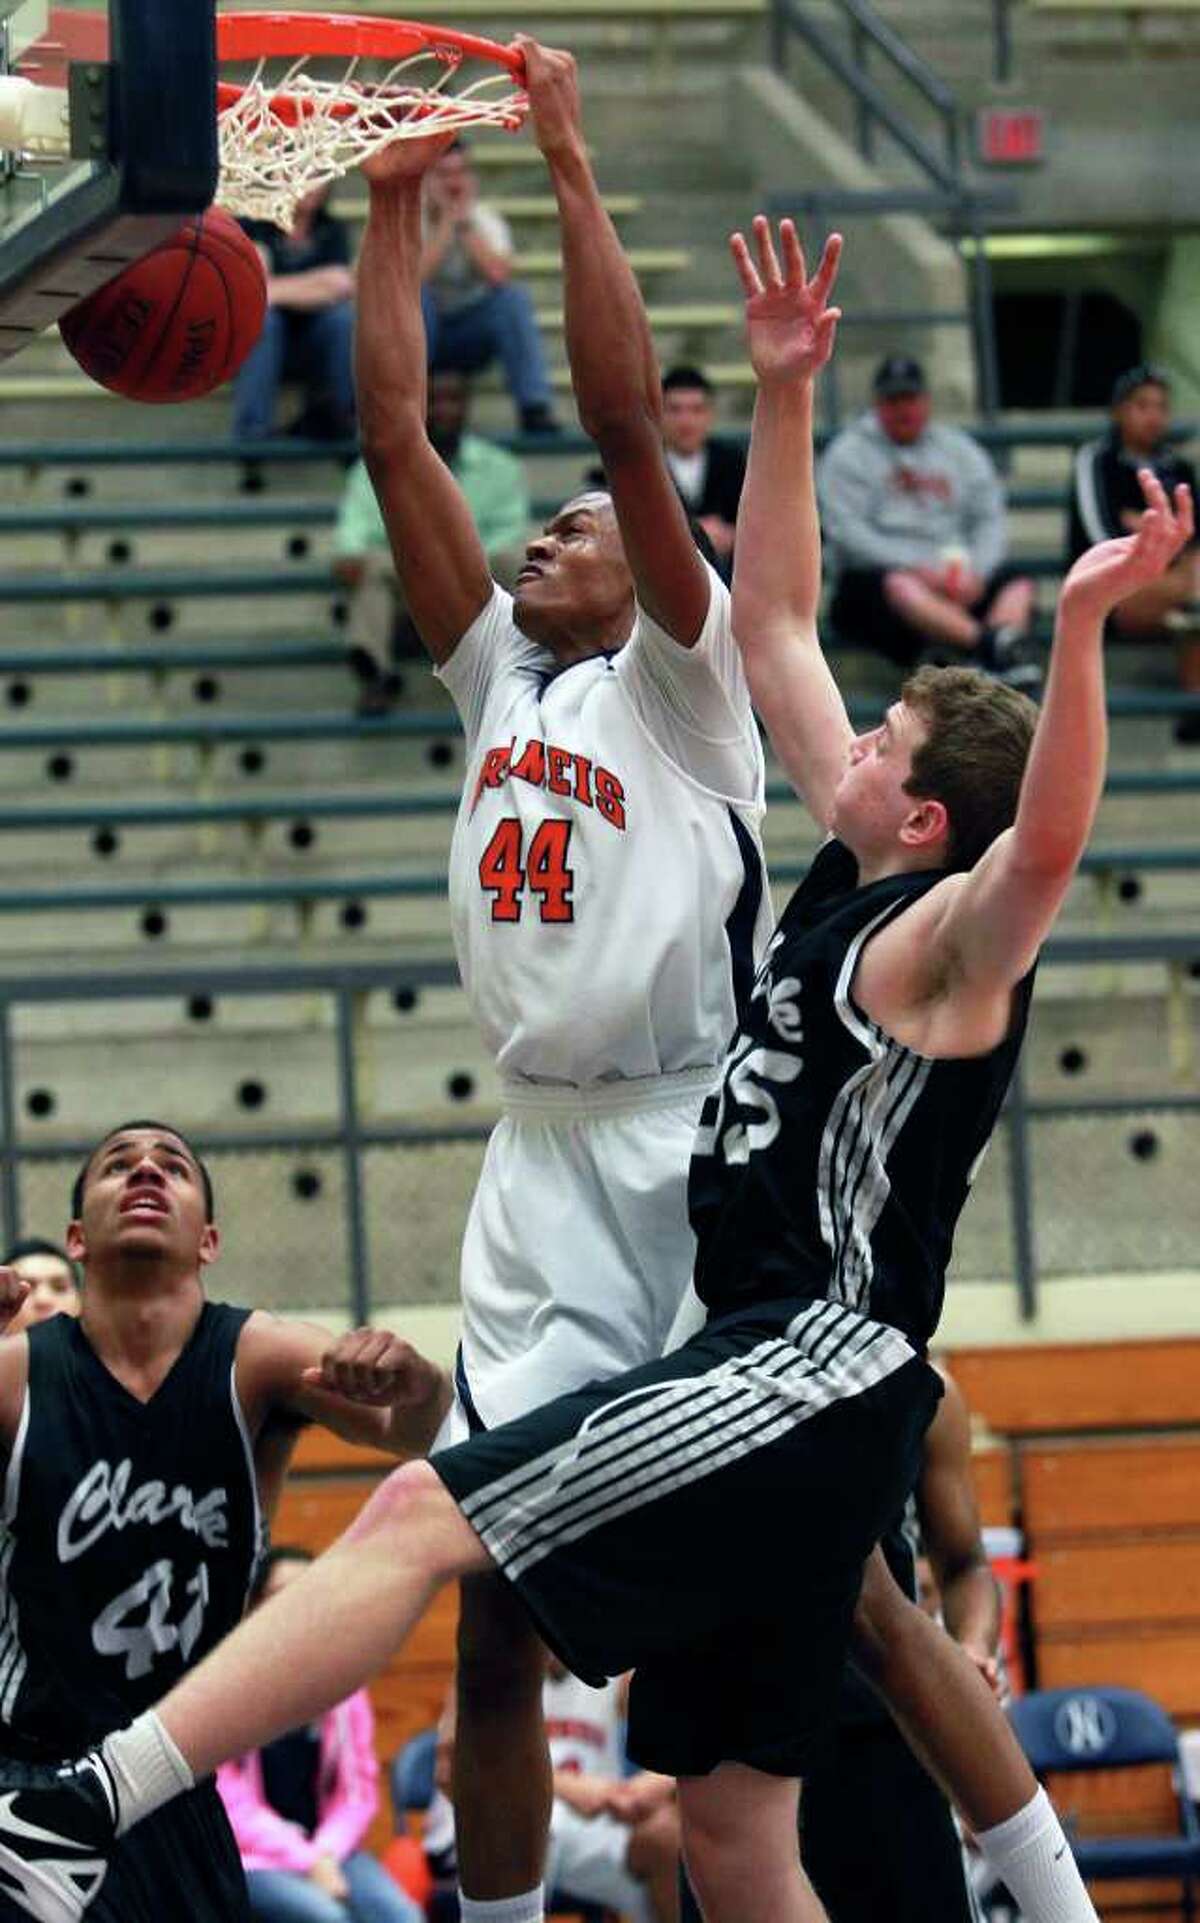 Brandeis post Eric Robinson stuffs a shot against John Chapman (right) and Shawn Gulley as Brandeis plays Clark in boys basketball at Taylor Field House on January 17, 2012 Tom Reel/ San Antonio Express-News